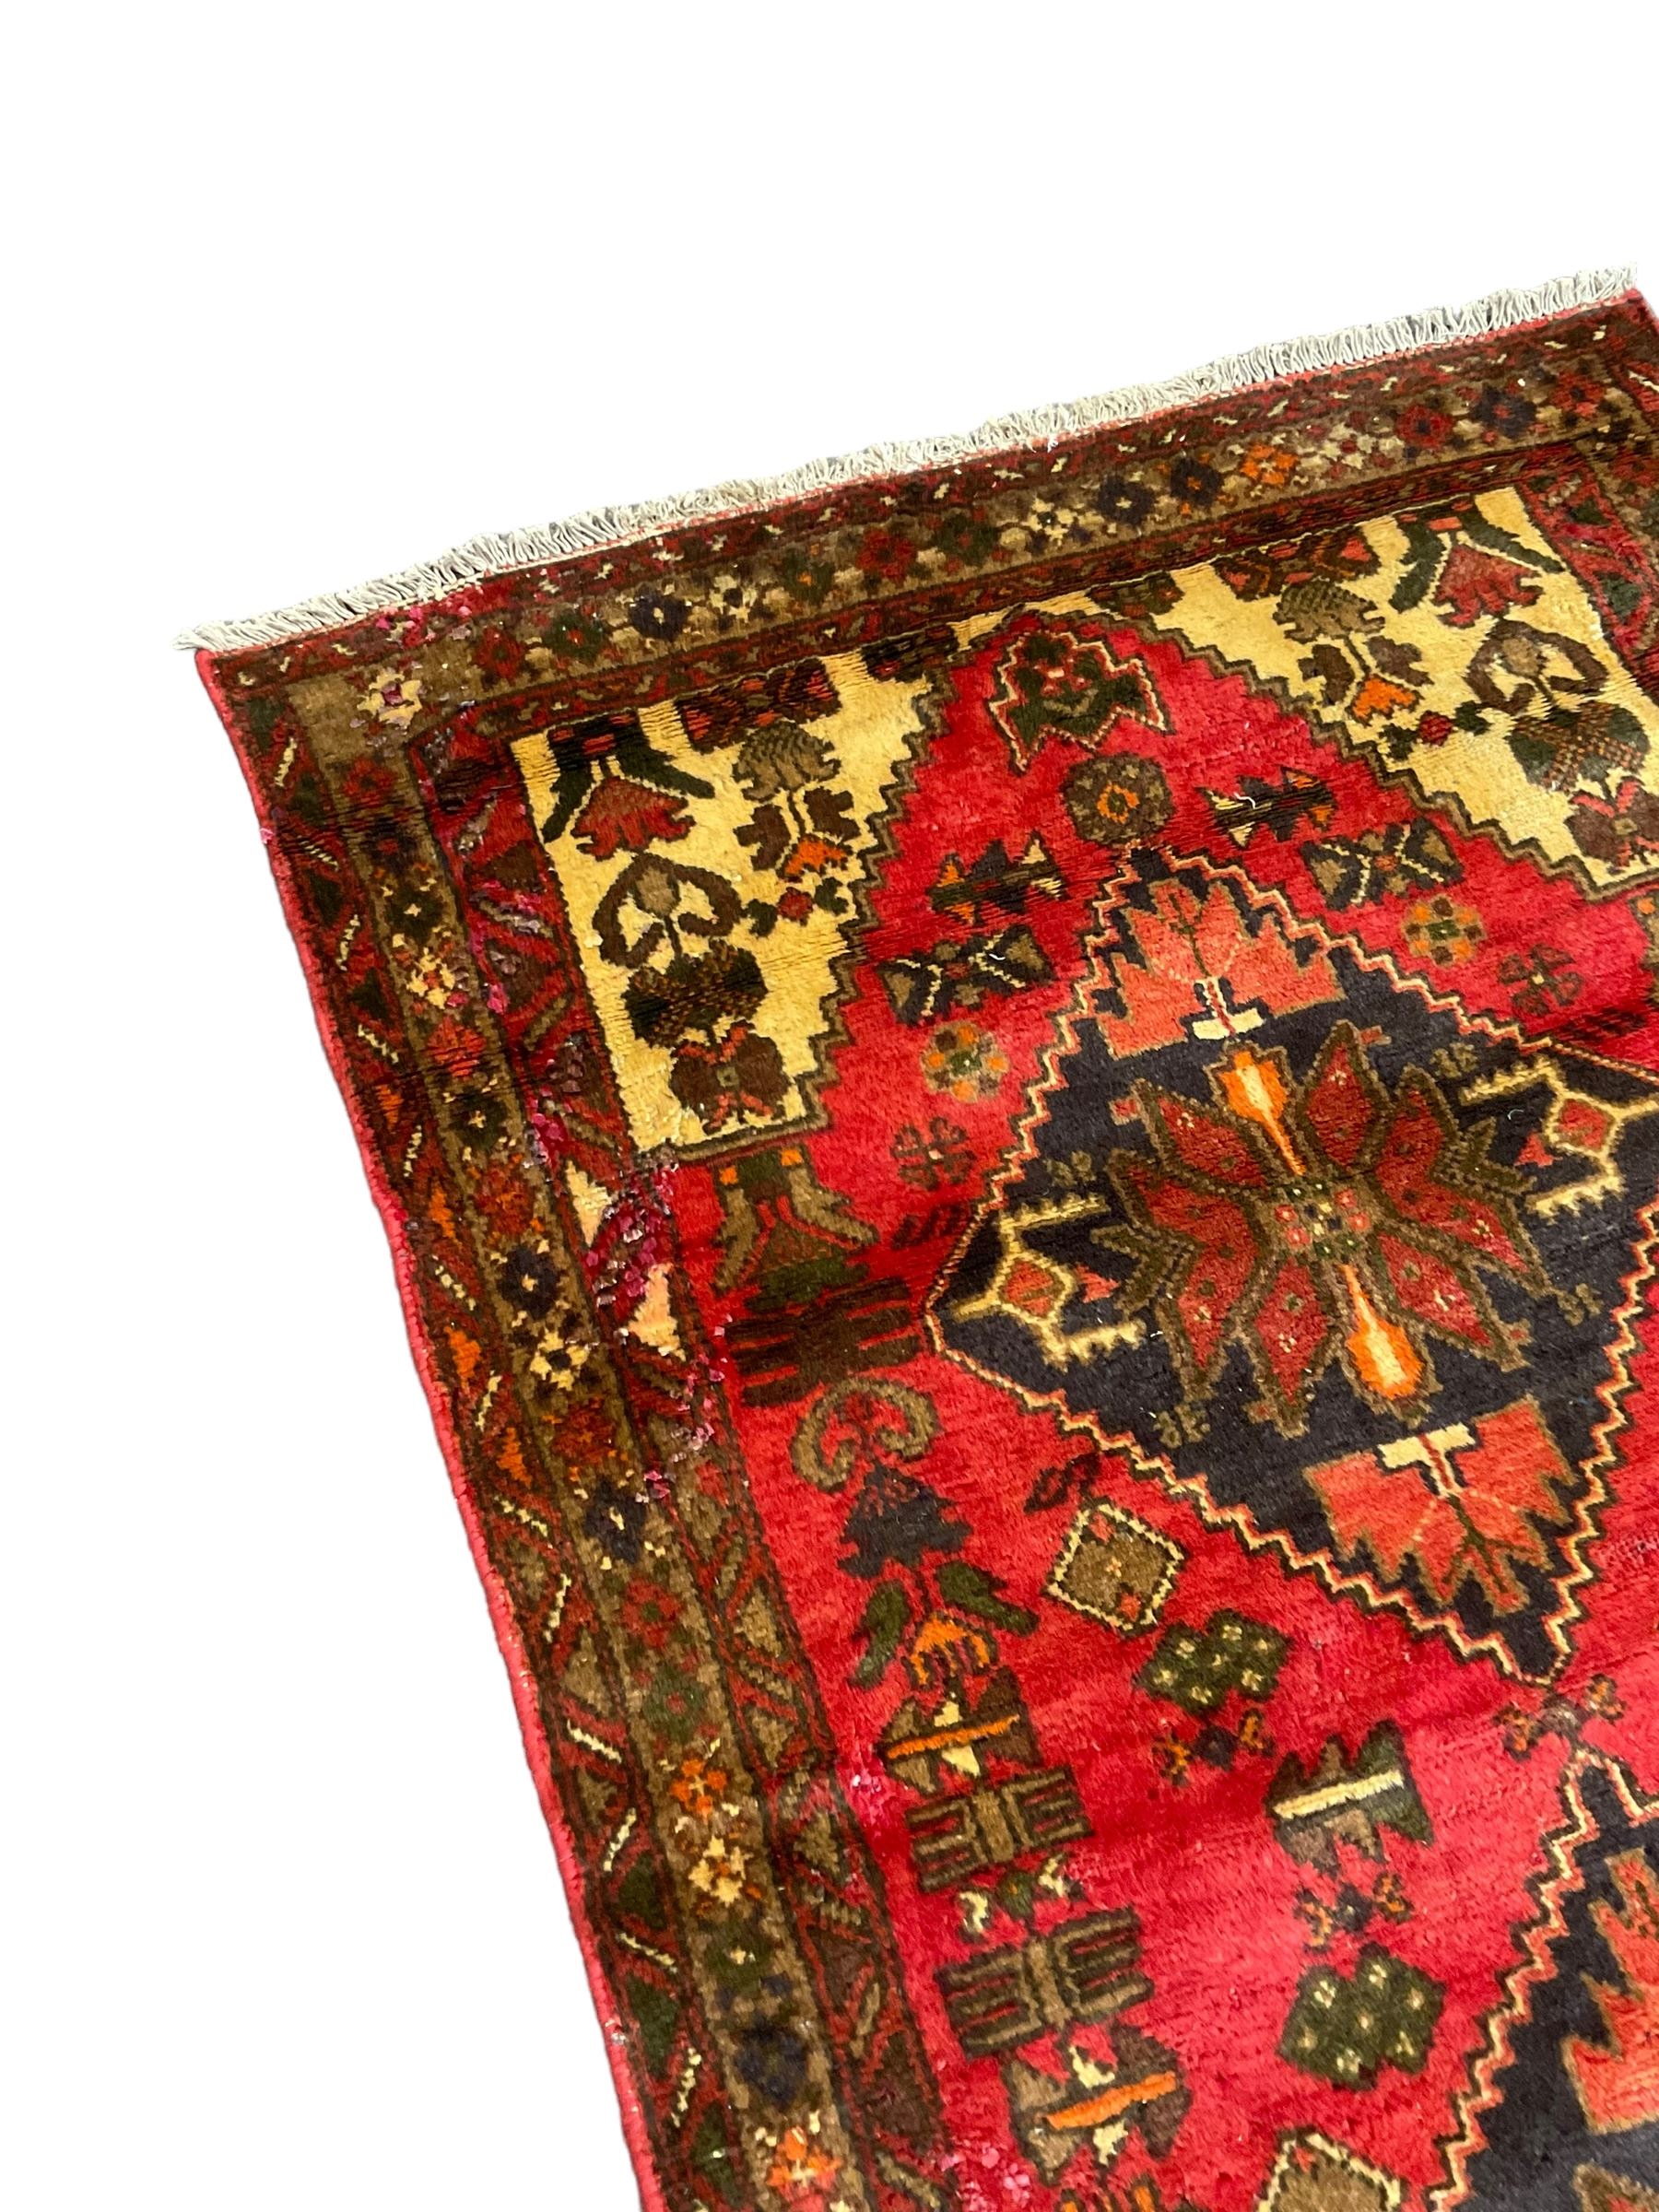 Persian Taleghan red ground rug - Image 3 of 5